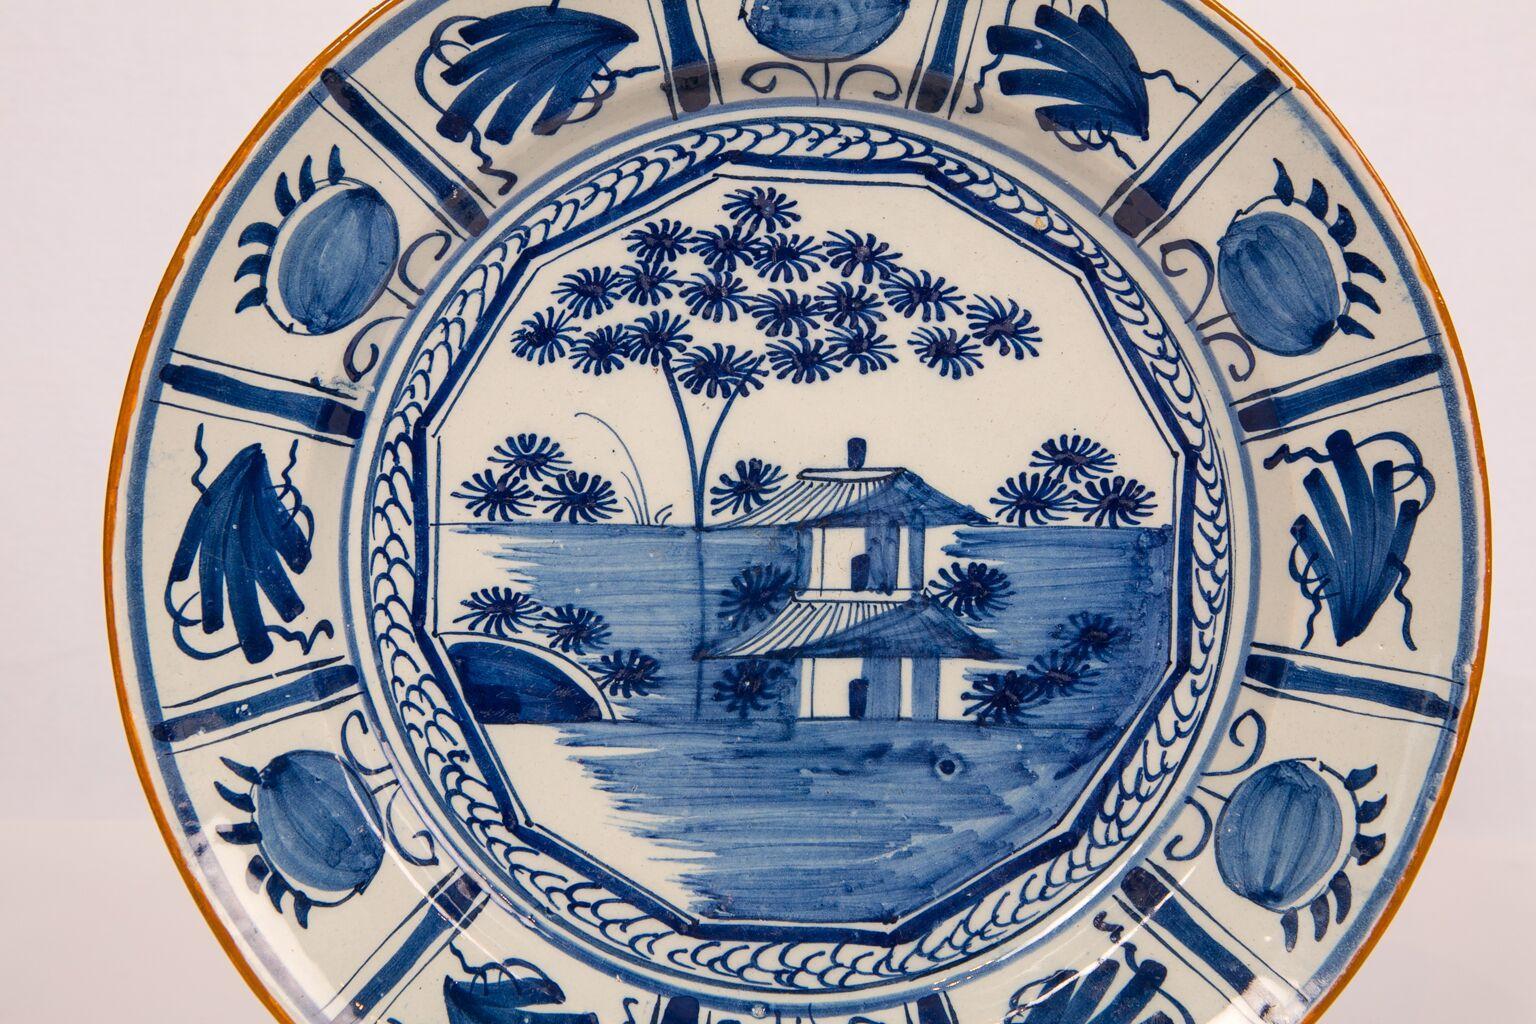 We are pleased to offer this Antique blue and white Delft charger with a well-painted landscape showing a house and trees. The decoration is crisp. The scene is framed by an attractive double border and completed with a slip-decorated orange/brown